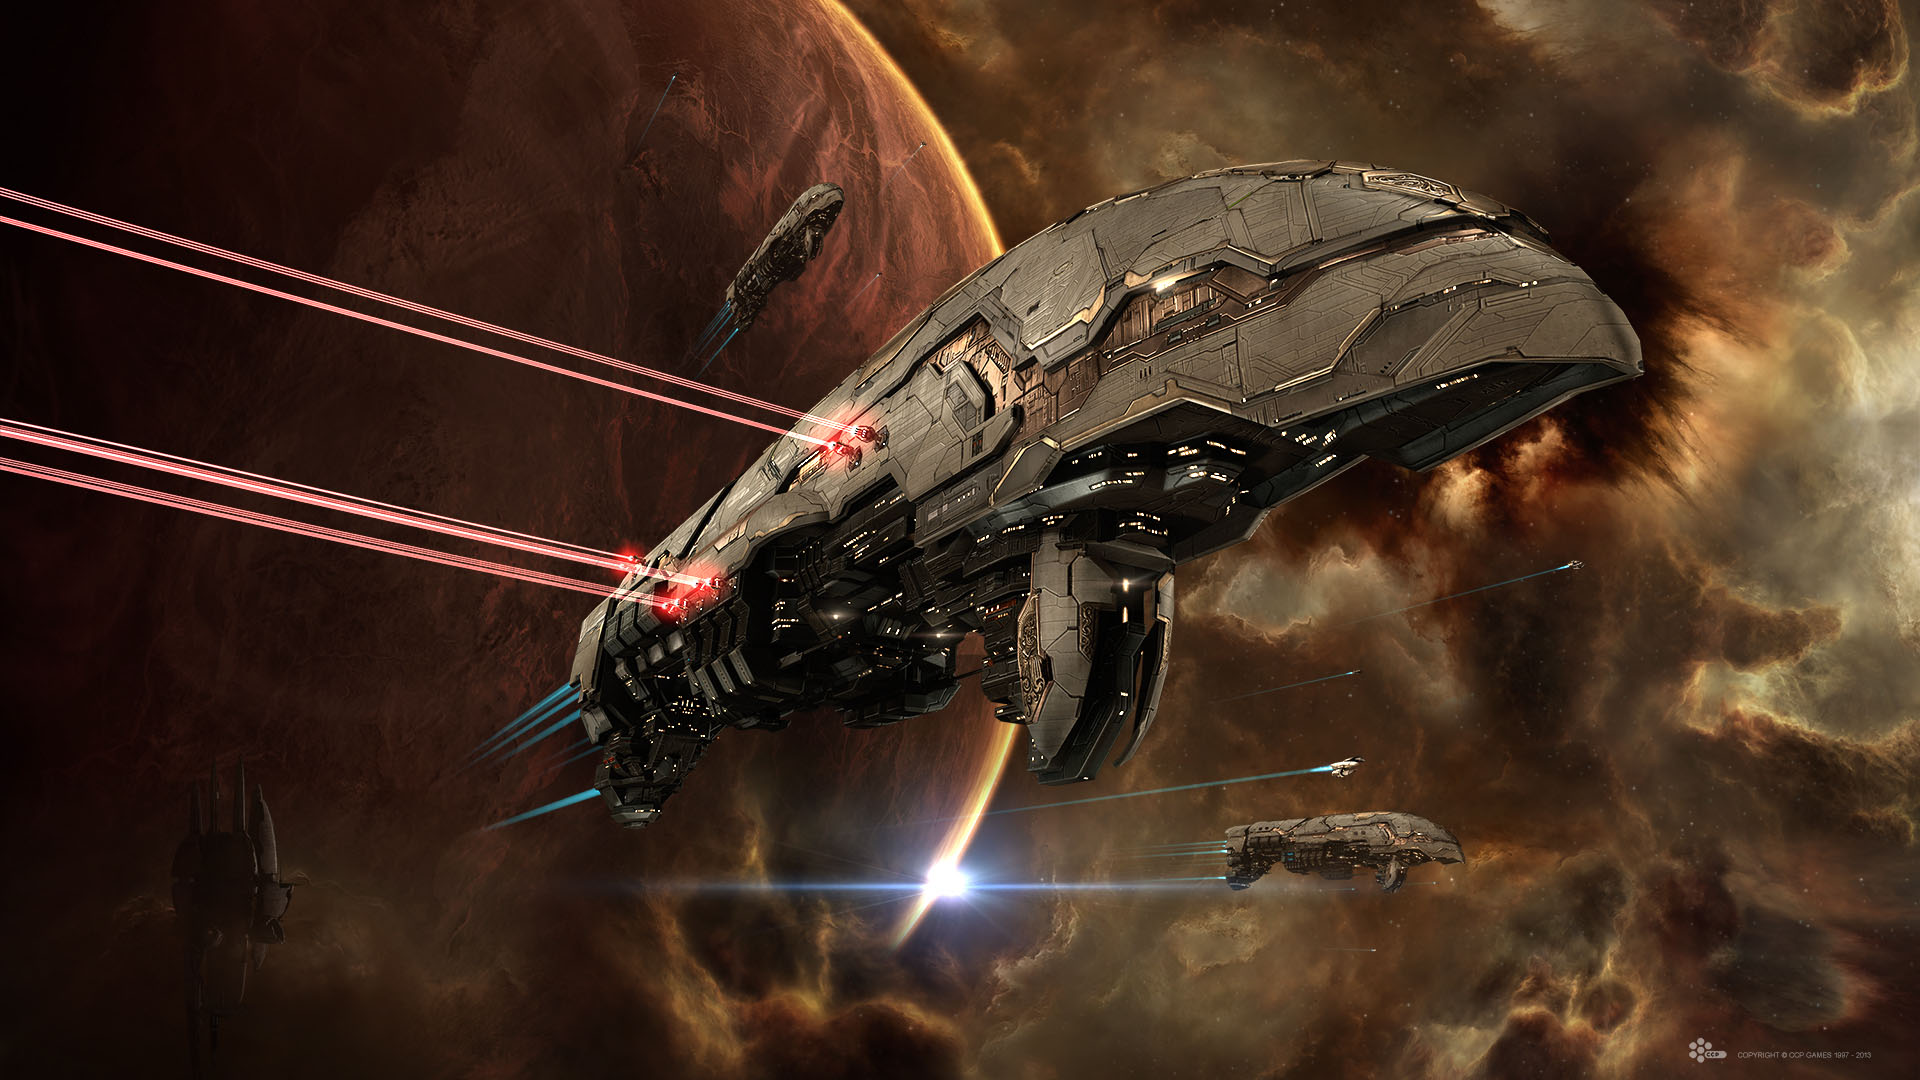 EVE Online - Gameplay Video  Welcome to EVE Online, the game where players  write history in a universe of unrivaled beauty, depth and opportunity.  Find out what you can do as